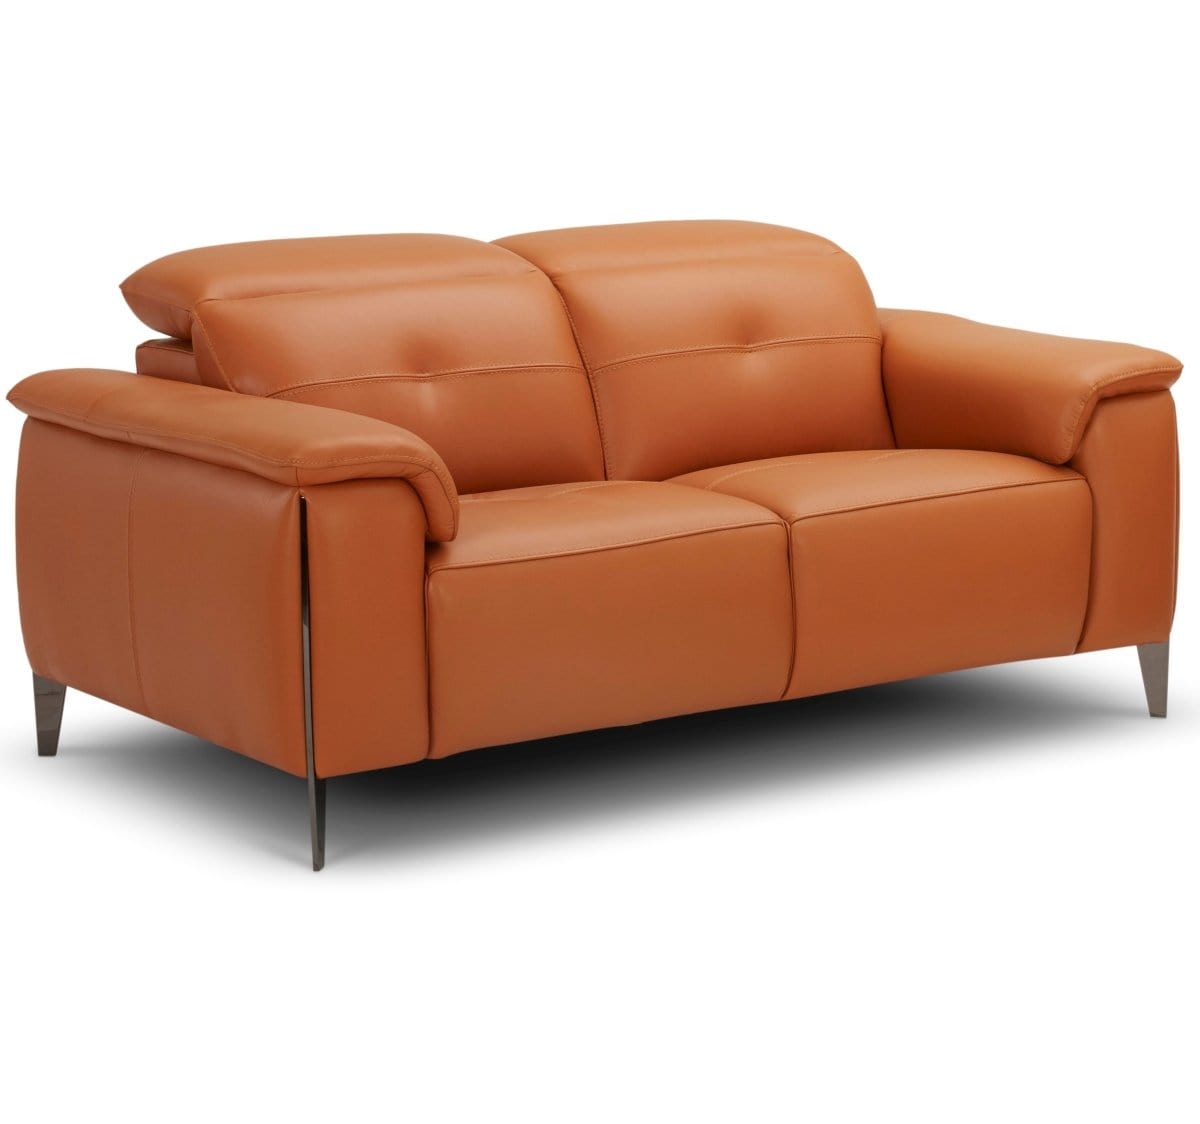 KUKA KM.5065 Full Top Grain Leather Electrical Recliner Sofa 2/3-Seater (M/O Series) (I) picket and rail